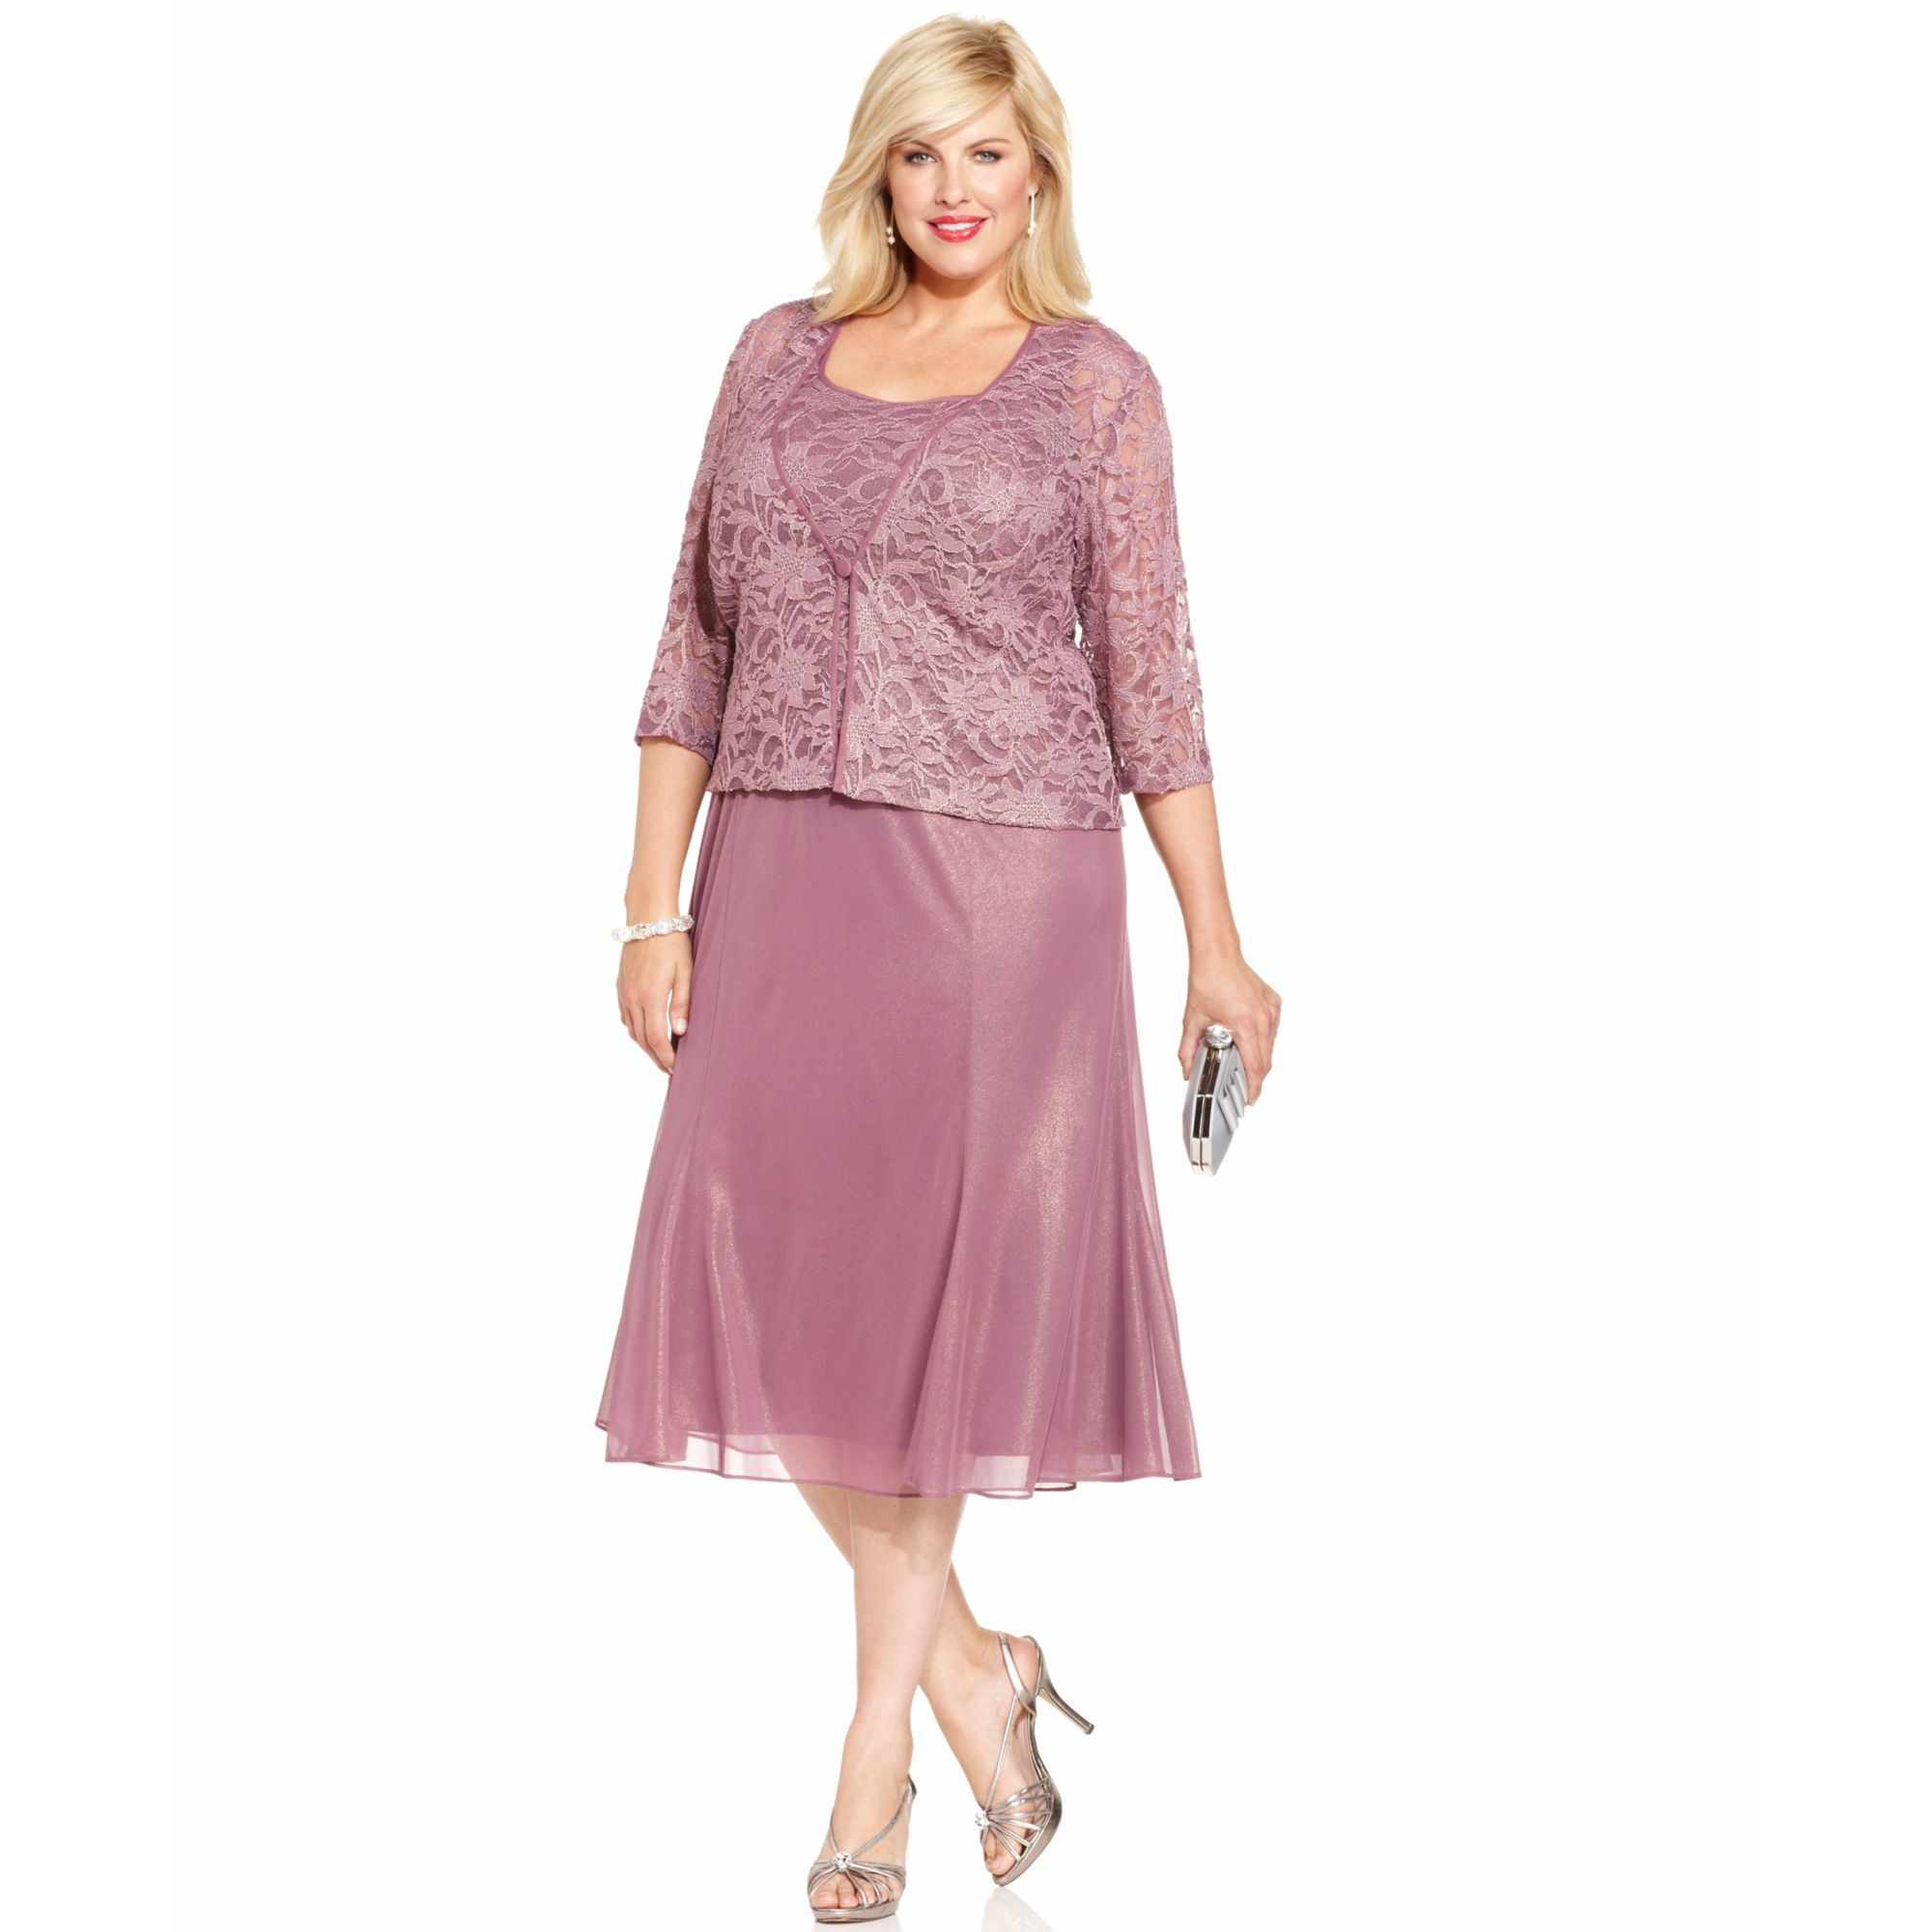 Plus Size Dressy Dresses With Jackets - Make Your Life Special